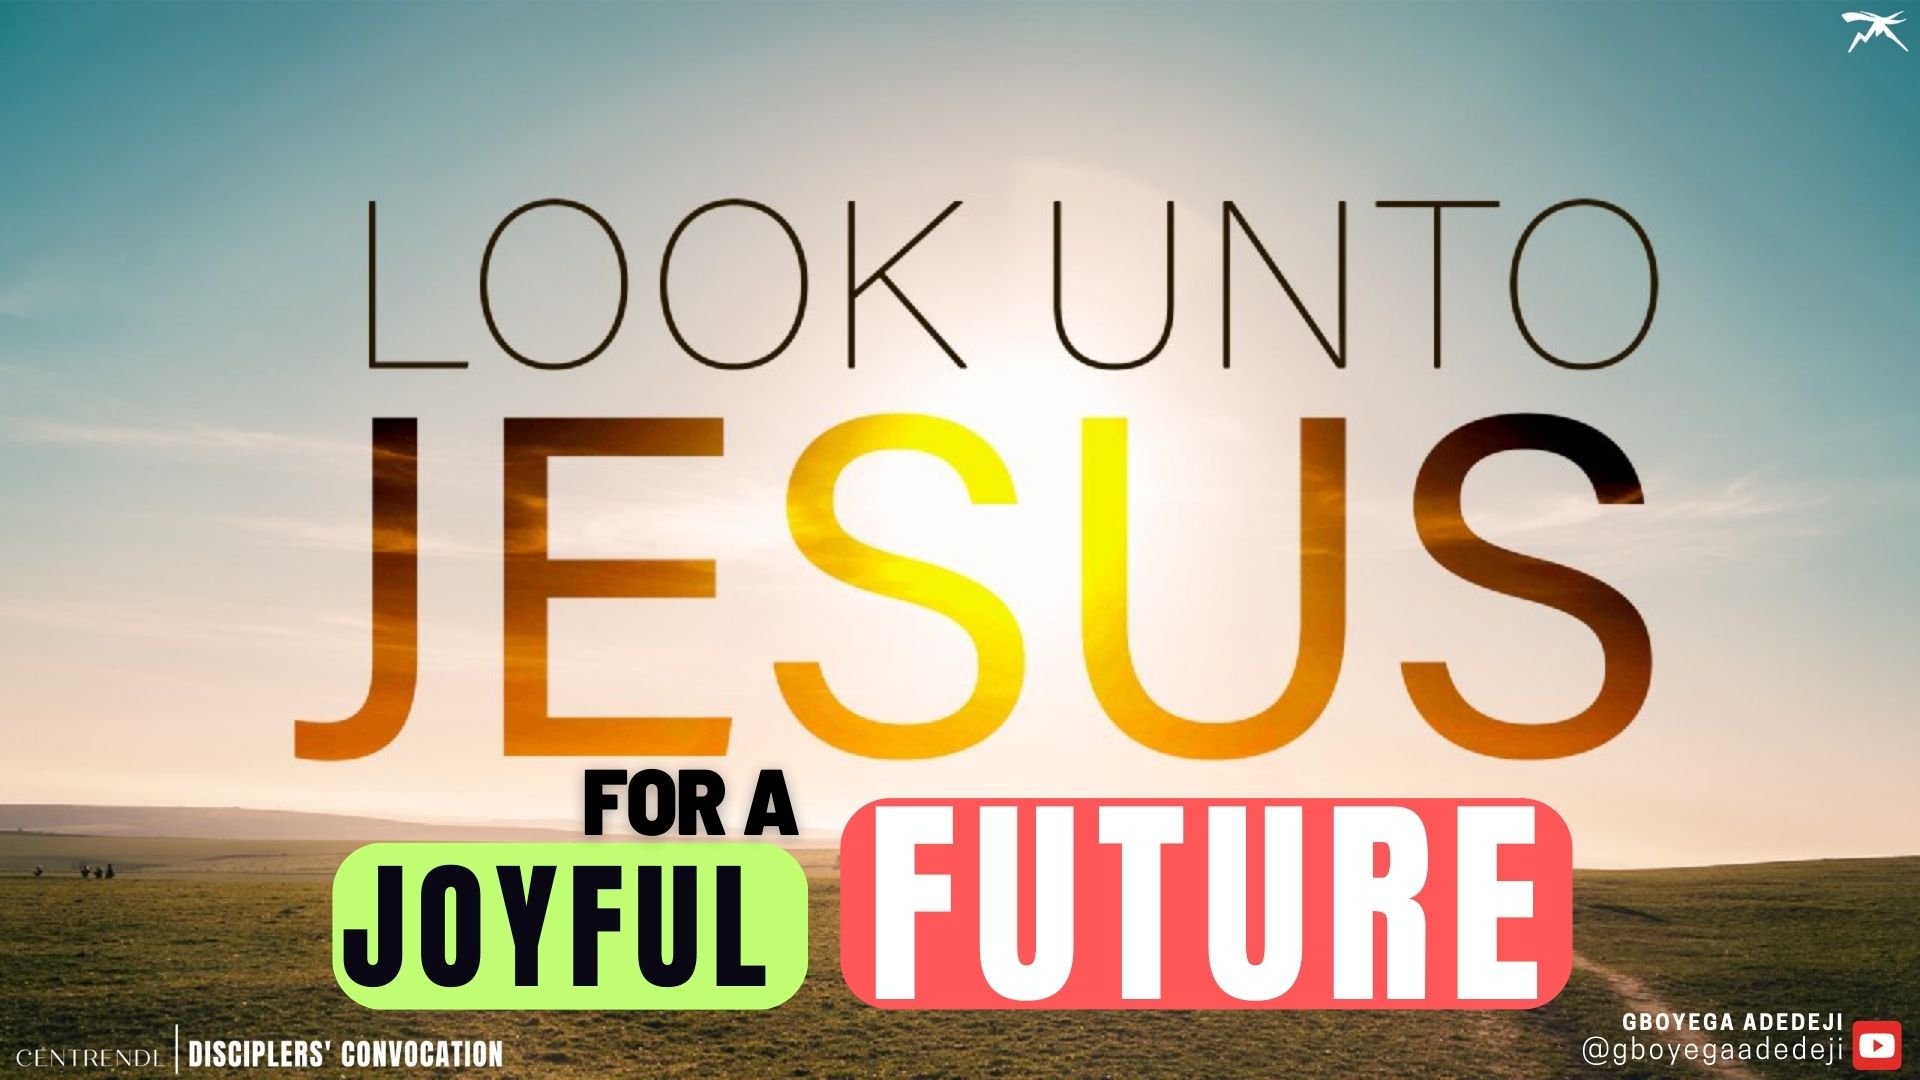 Looking Unto Jesus: Rediscovering The Father-Son Relationship Between God And Man for A Joyful Future